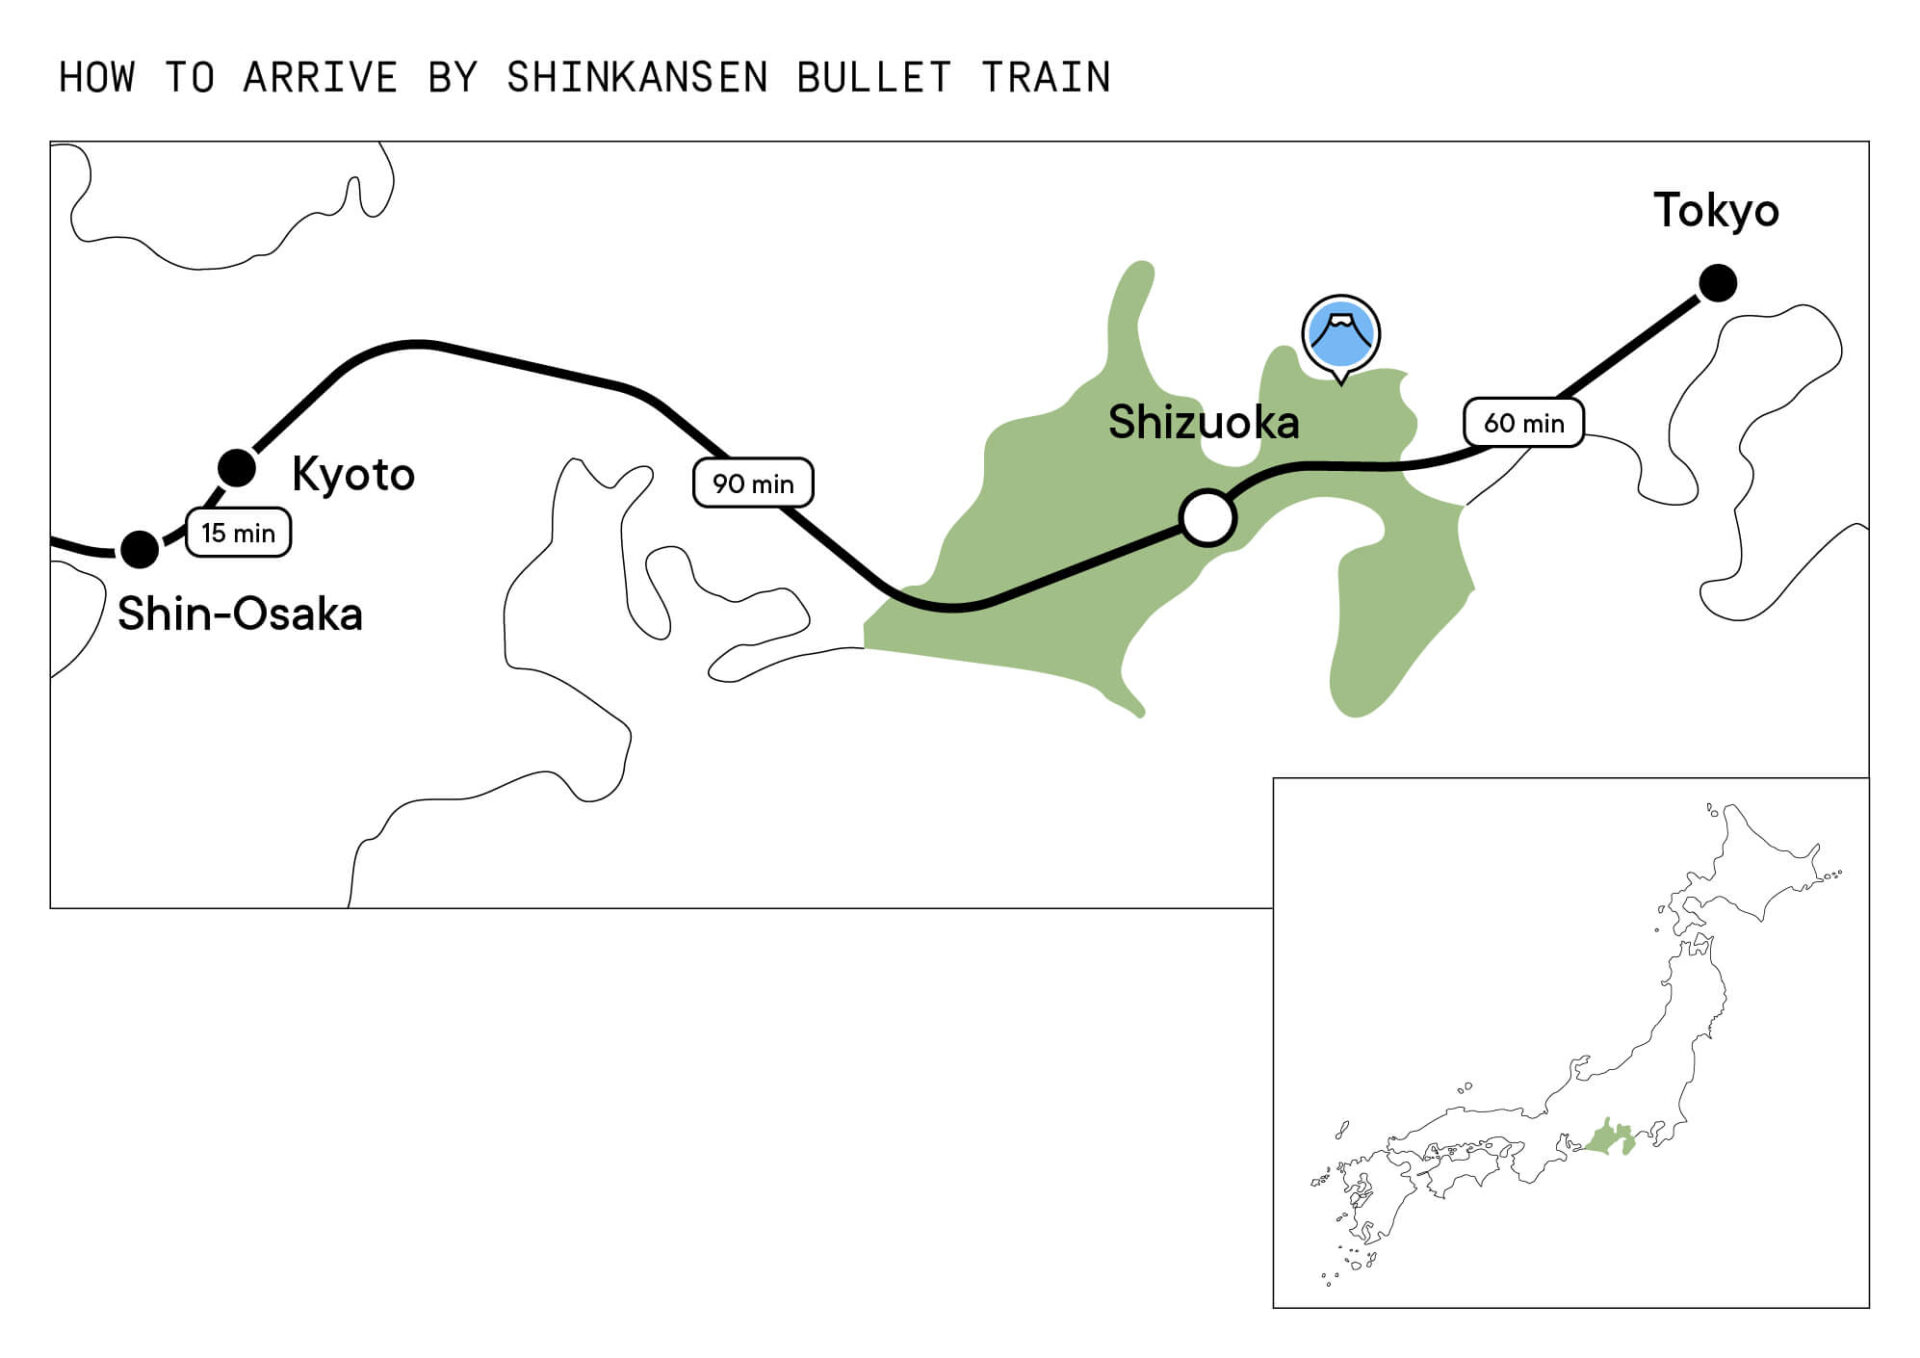 Shizuoka is only 60 minutes from Tokyo and 90 minutes by Shinkansen. Easy one day trip from Tokyo, perfect balance of city and nature, few tourists.